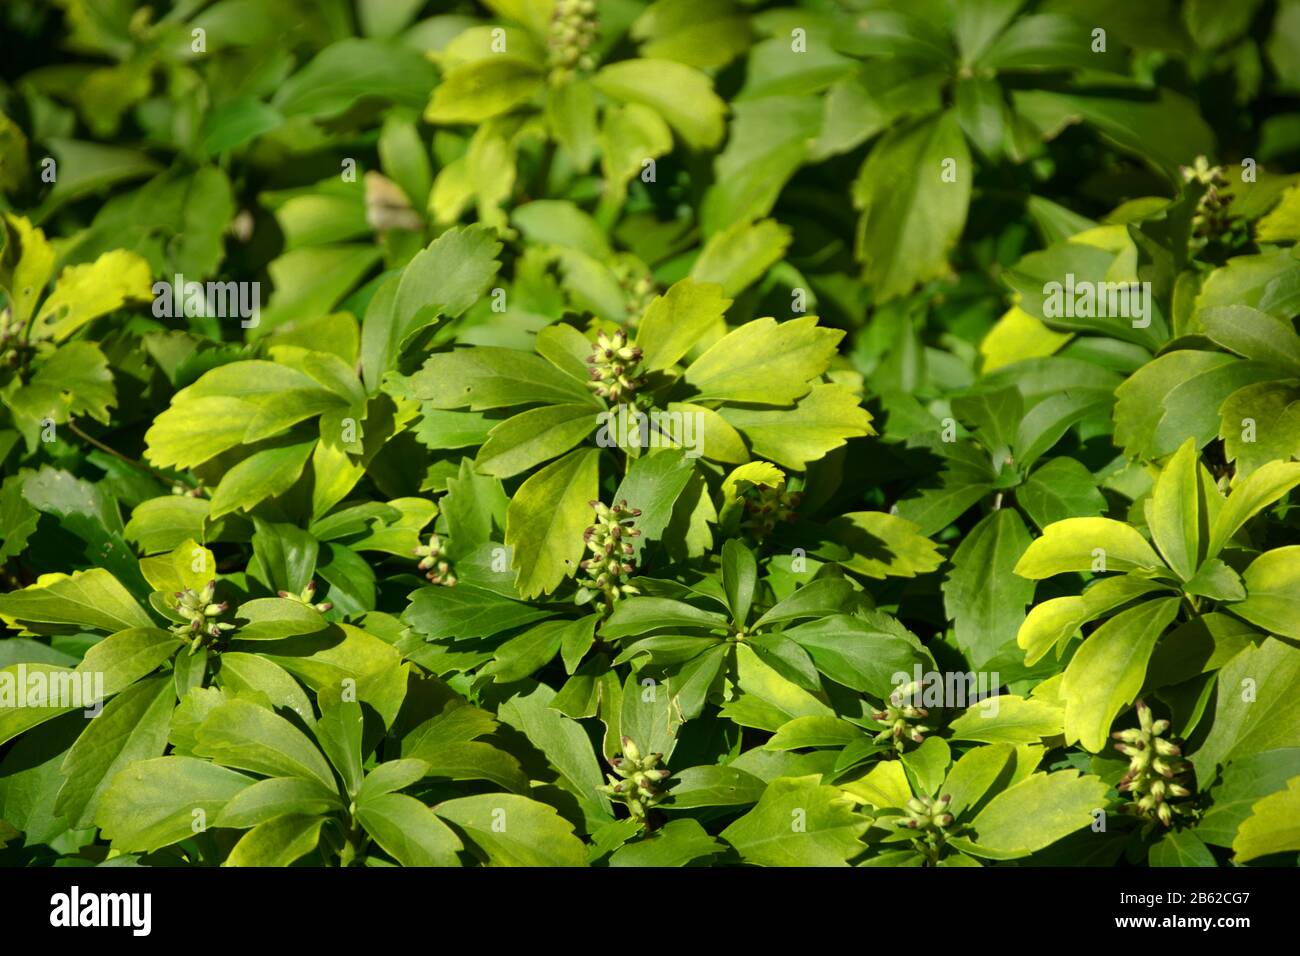 Evergreen Carpet Box Plant With Tiny Flowers In Spring Pachysandra Terminalis Or Japanese Spurge Plant In Bloom Stock Photo Alamy